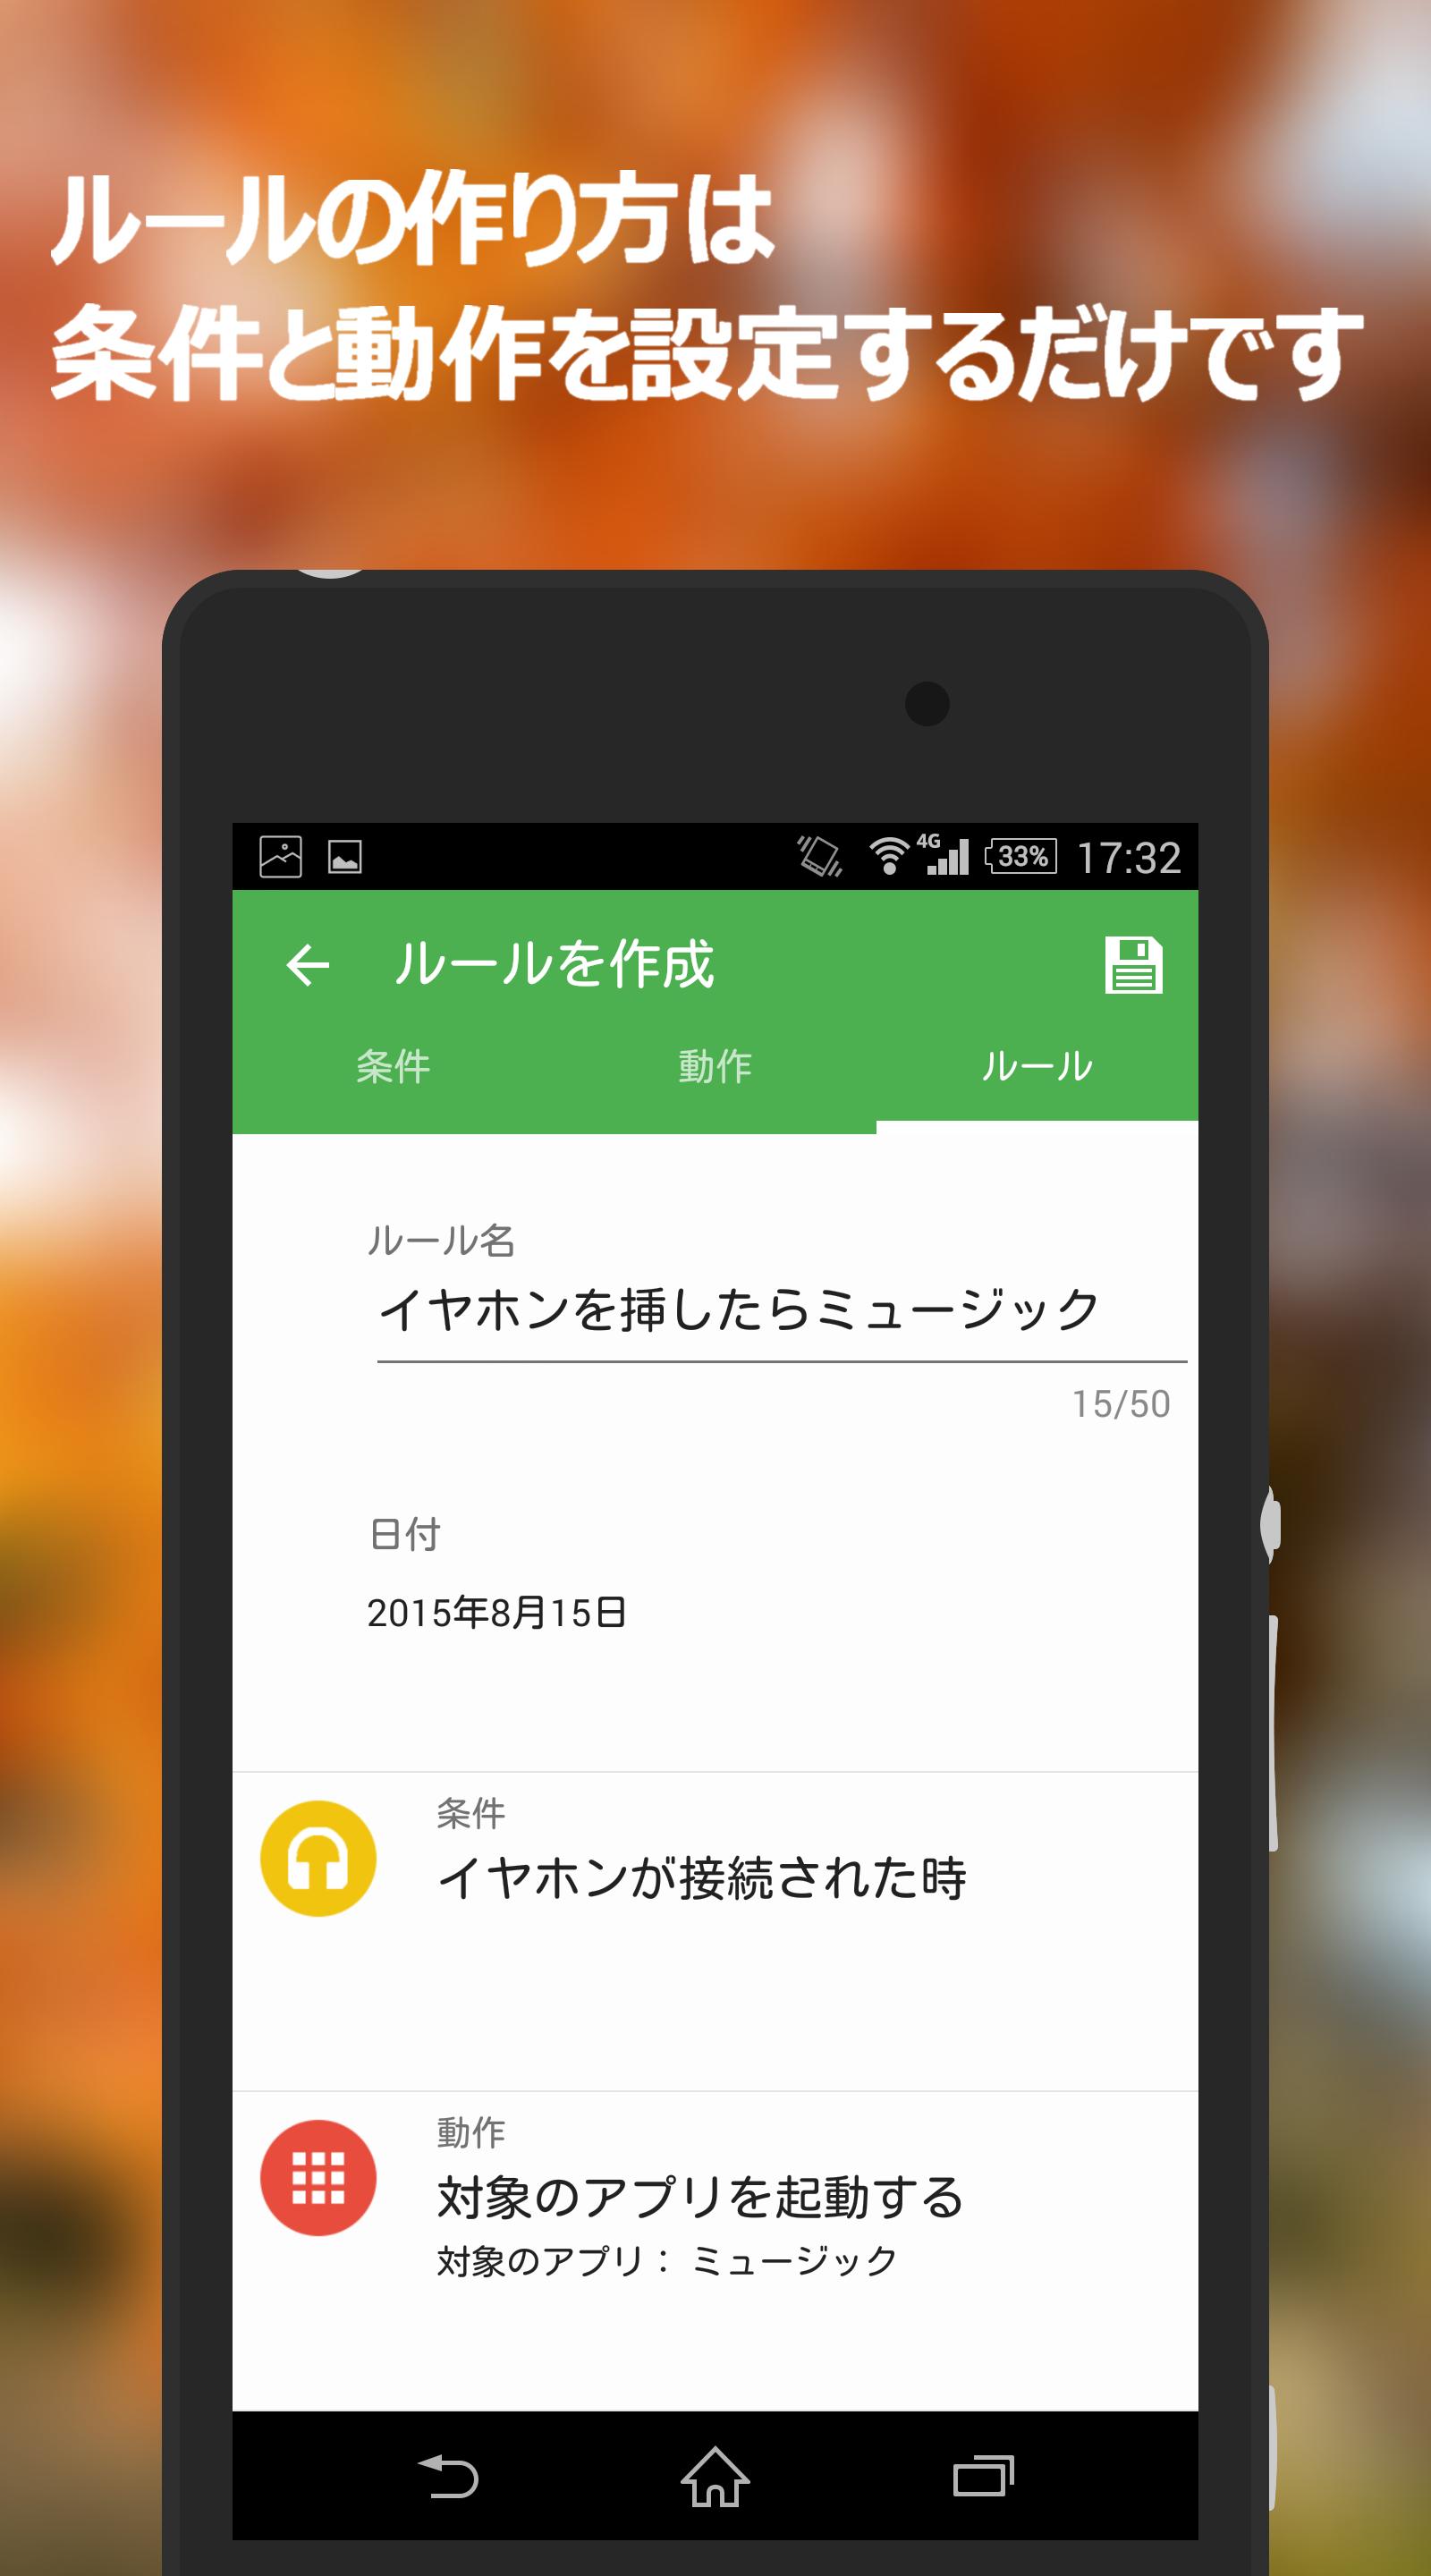 Rulemaker あなたのスマホを便利にするアプリ For Android Apk Download